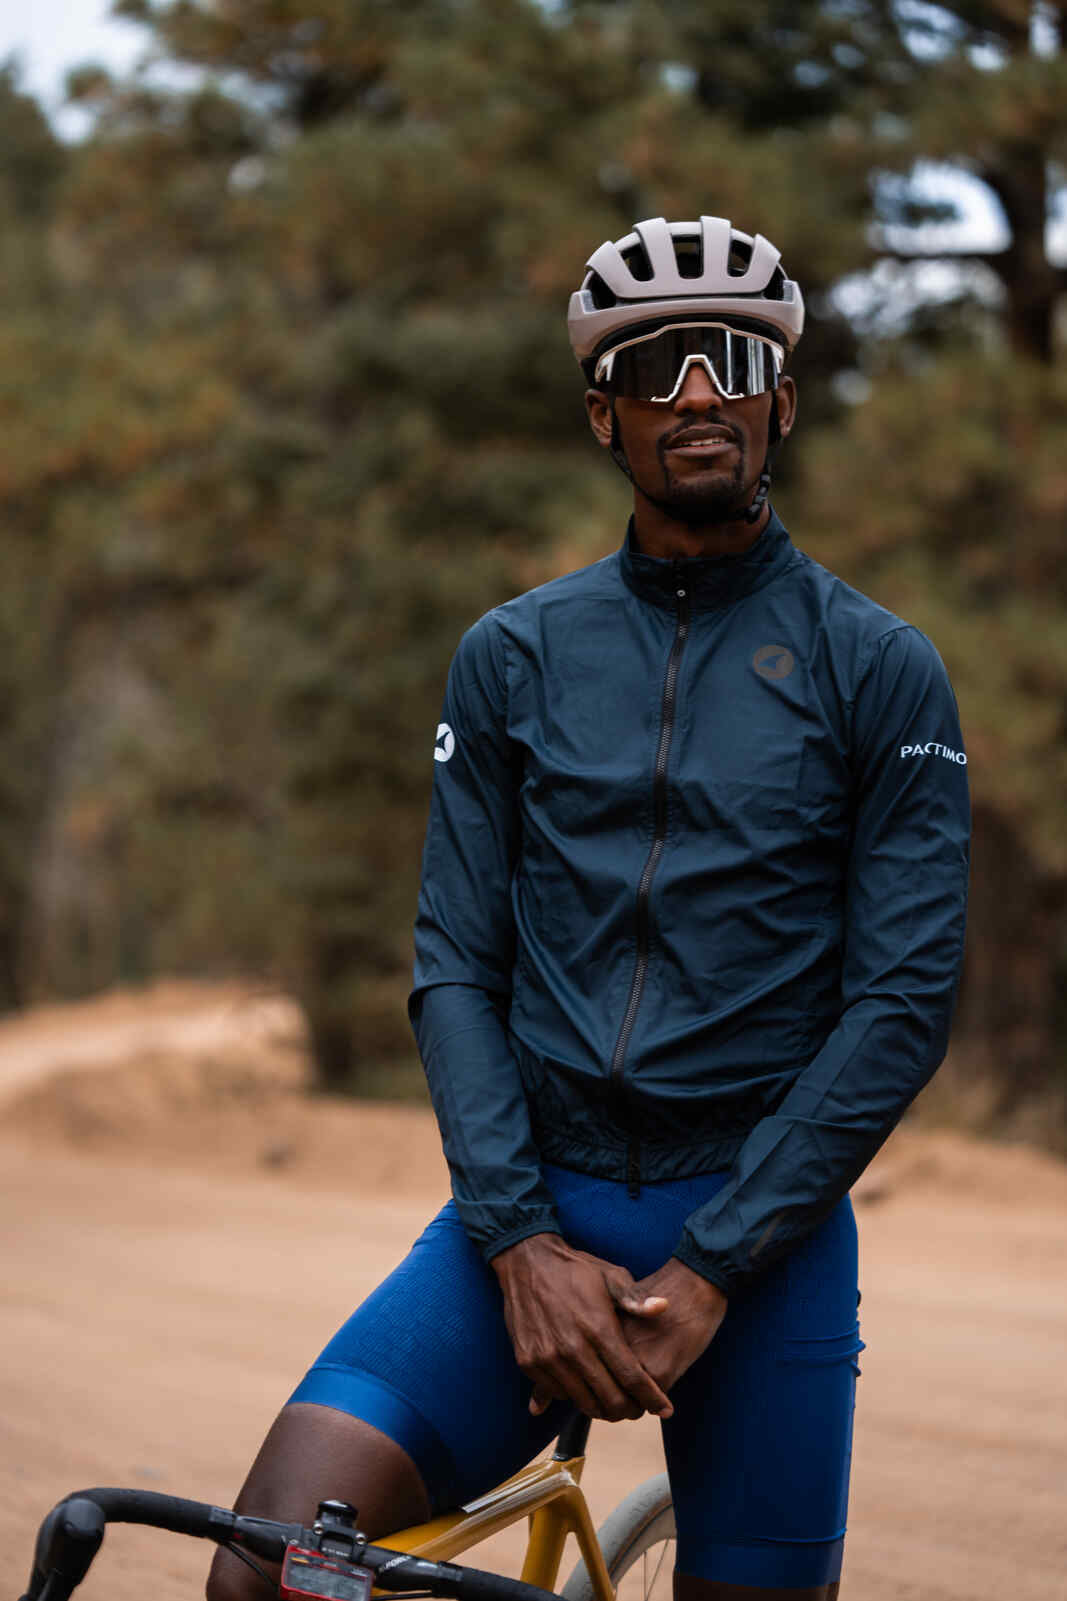 Cyclist in Men's Packable Navy Blue Cycling Wind Jacket 